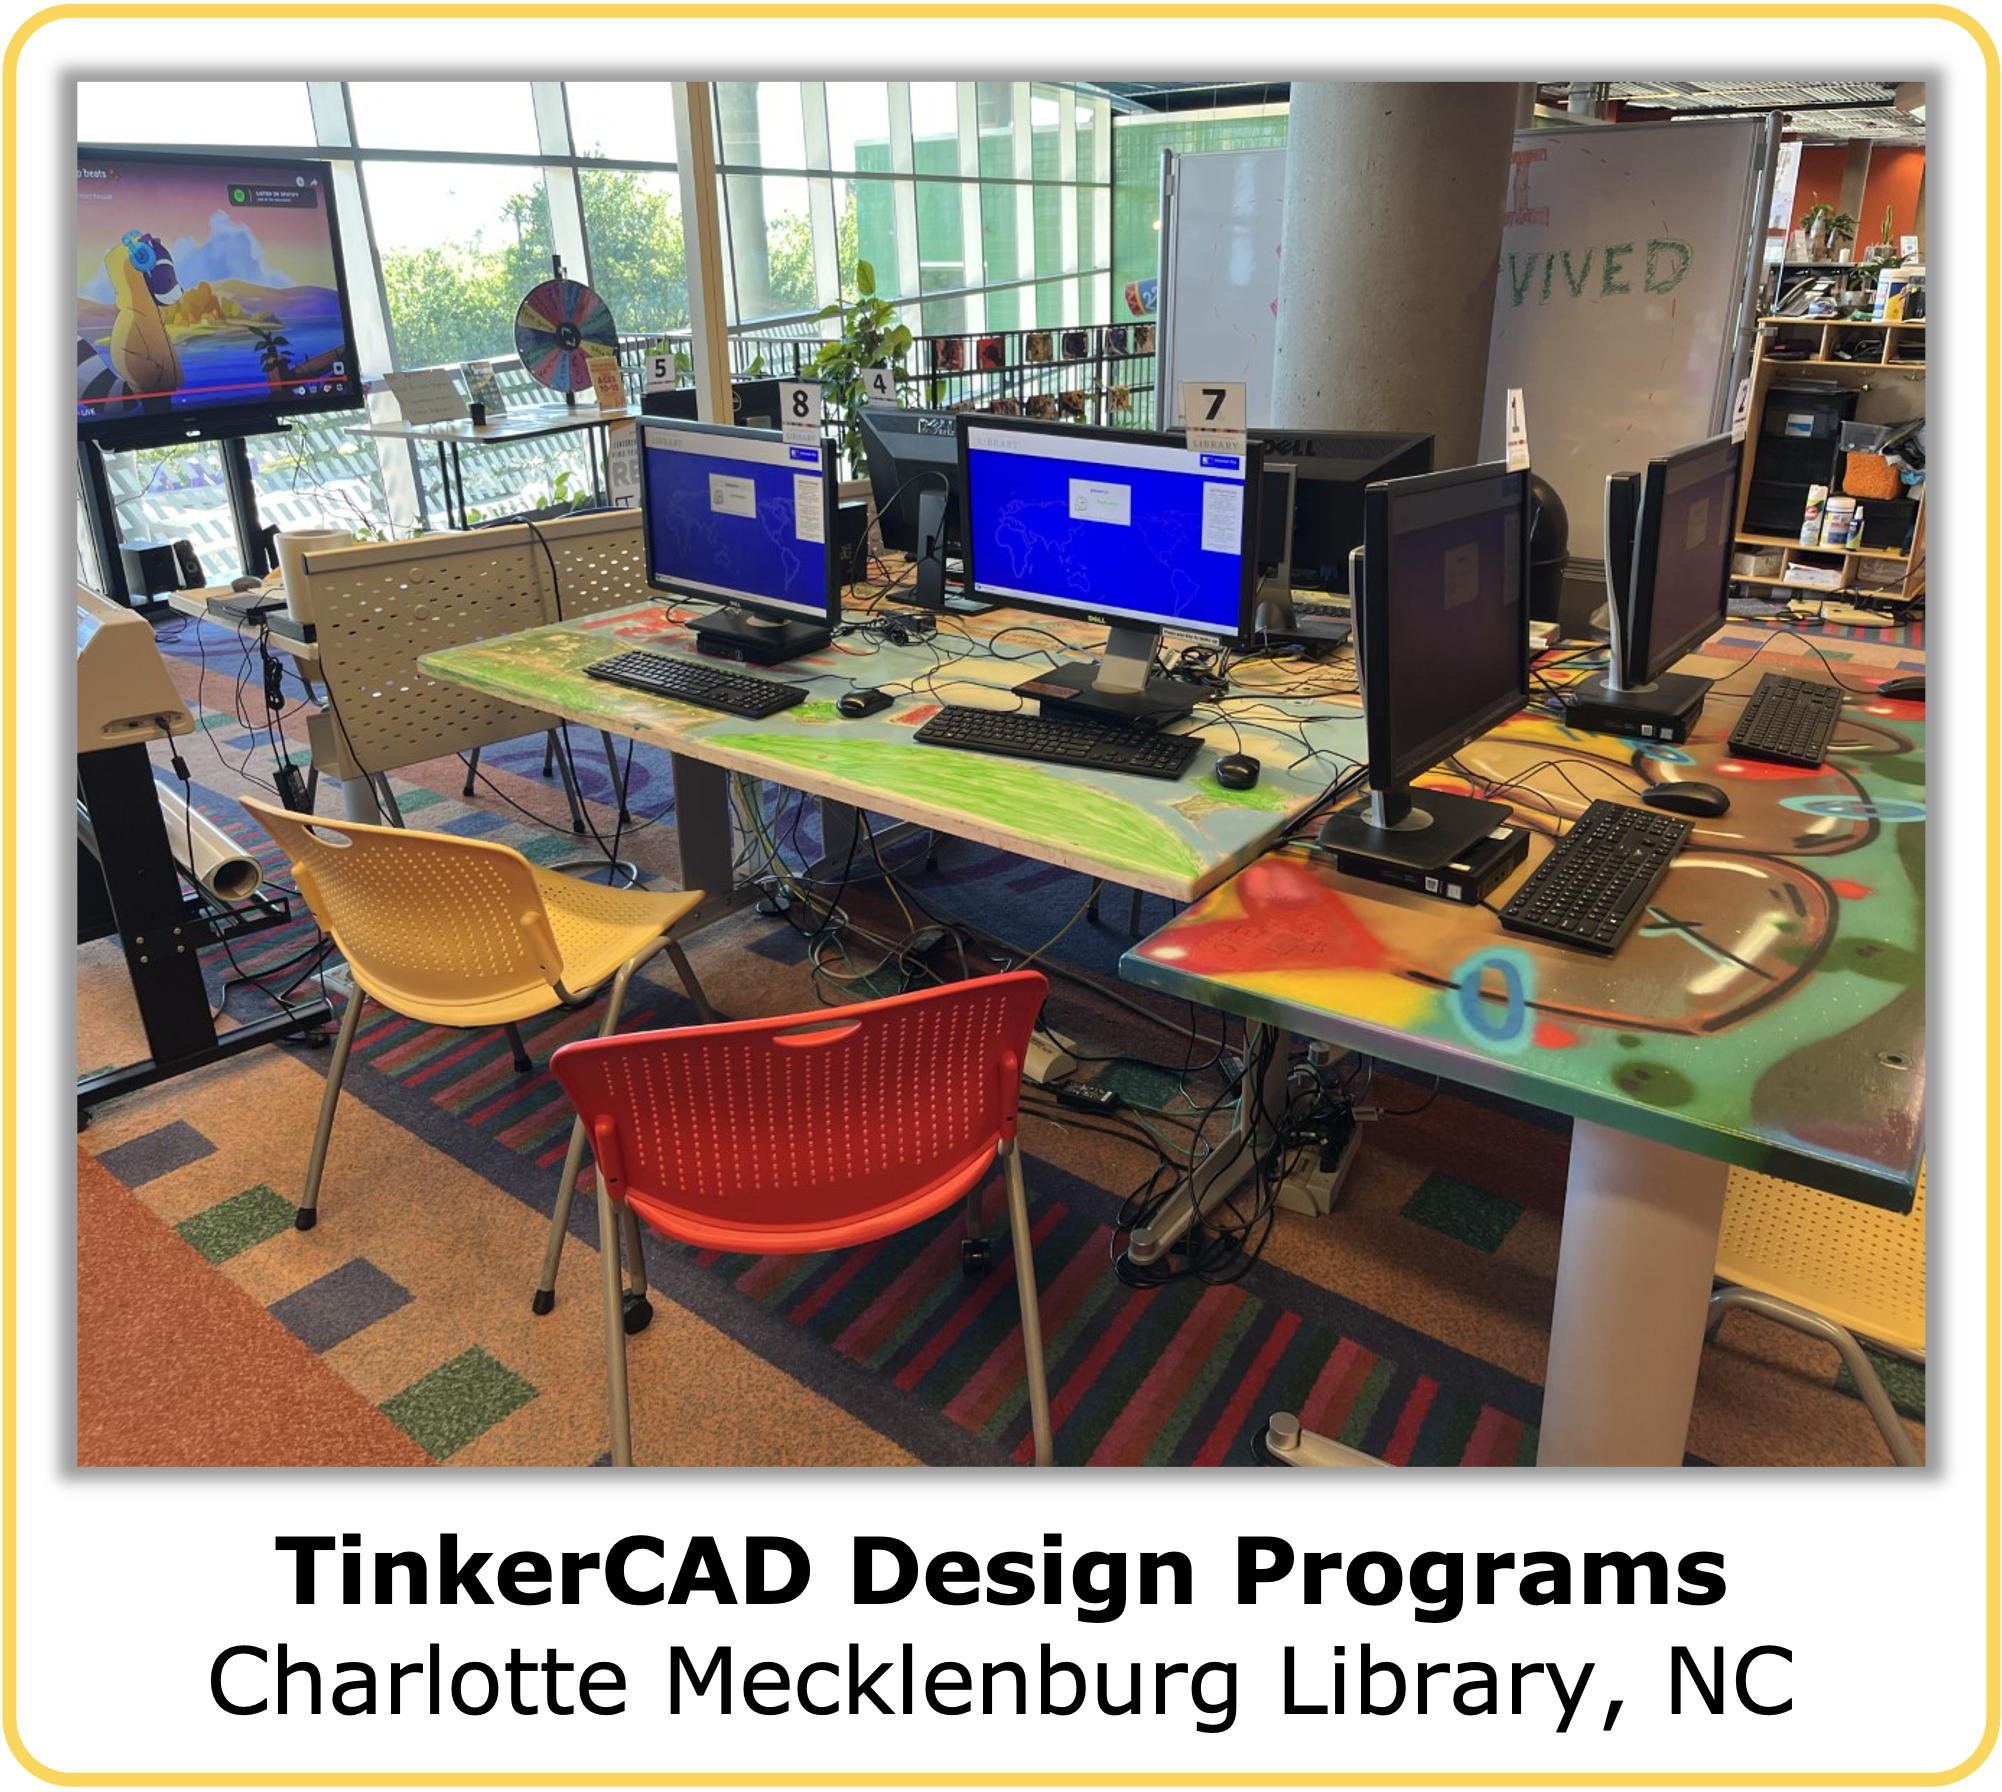 Click to open the case study of the tinker CAD design program at the Charlotte Mecklenburg Library in North Carolina.